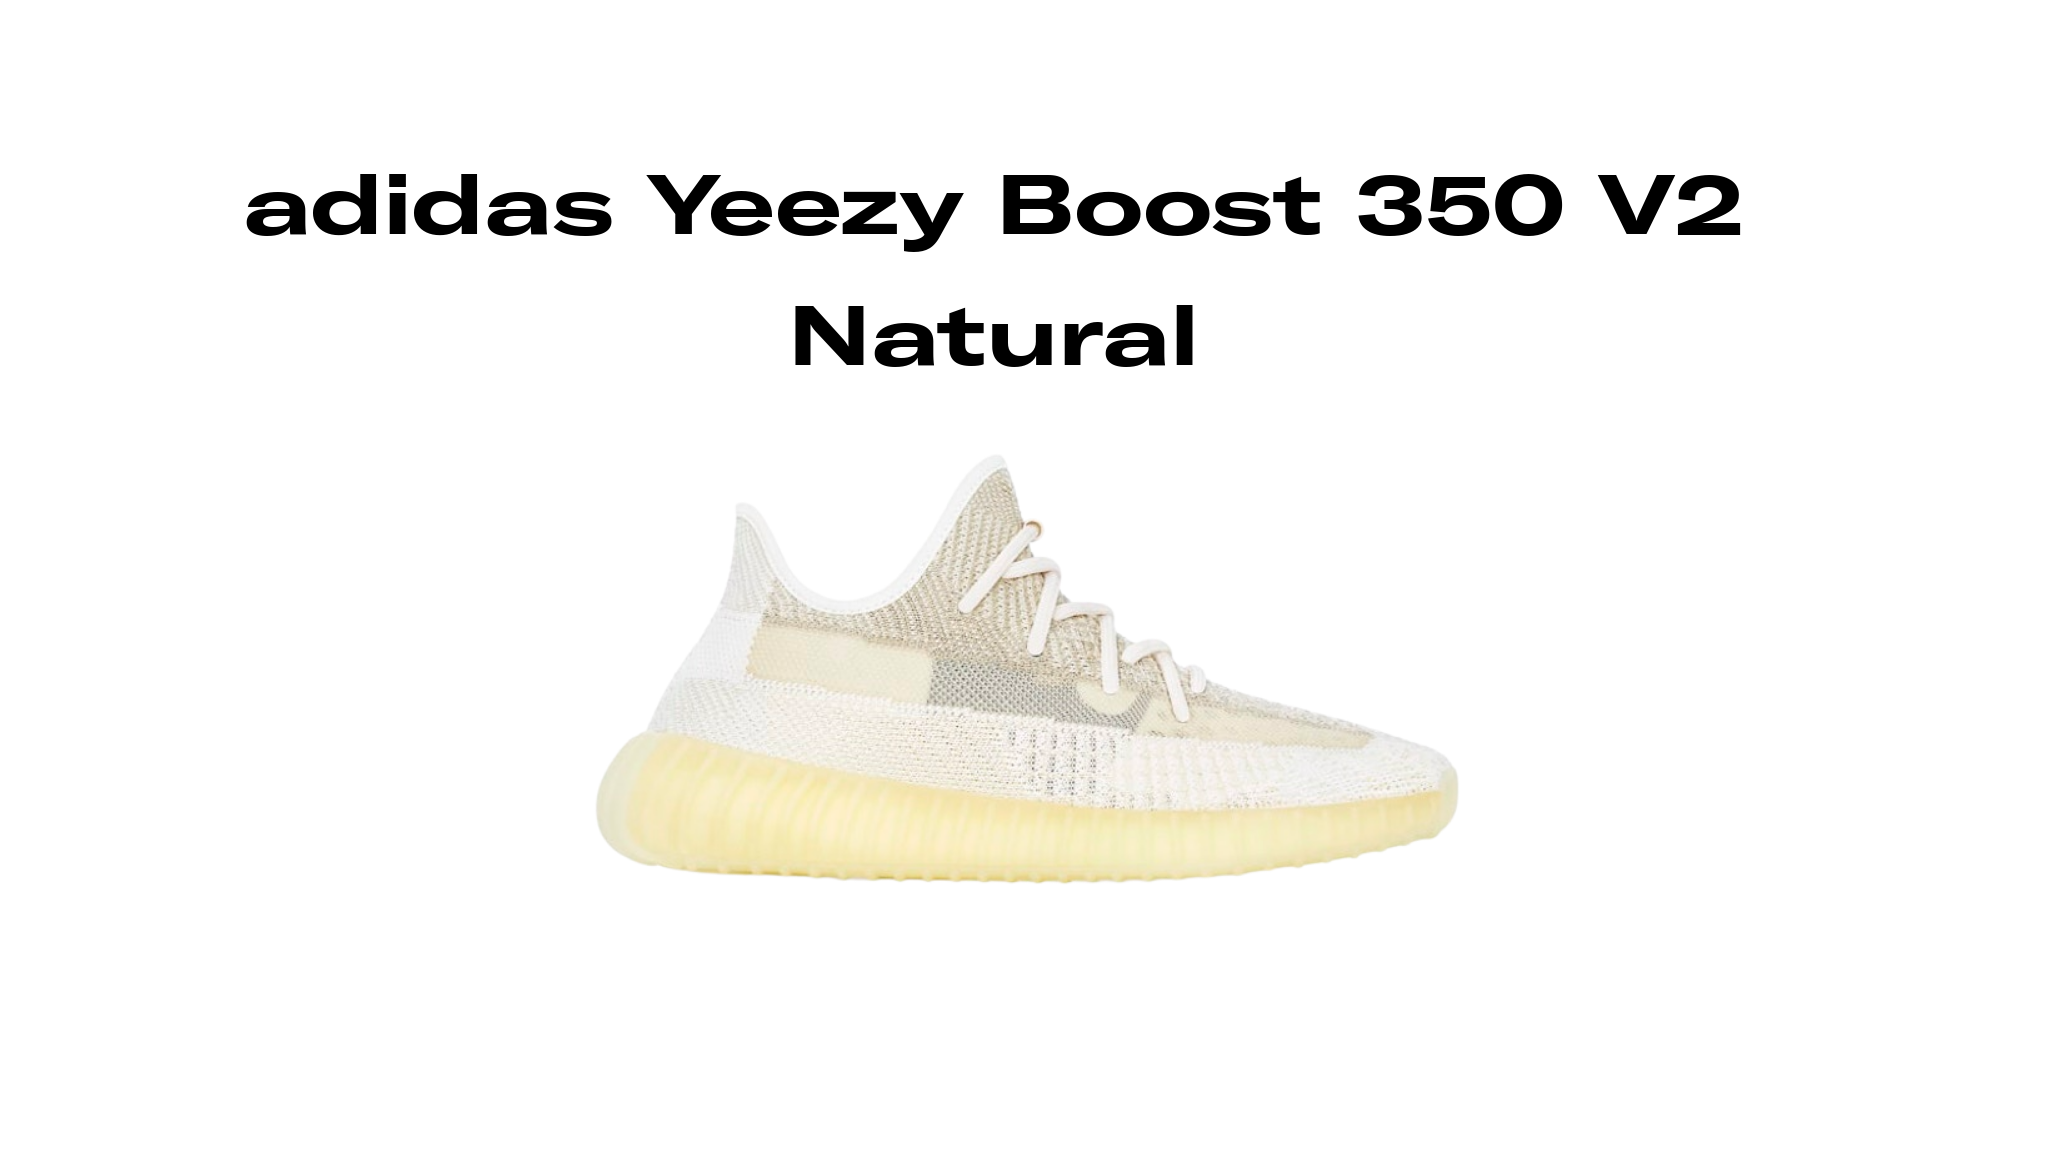 Attempt compliance U.S. dollar adidas Yeezy Boost 350 V2 Natural, Raffles and Release Date | Sole Retriever